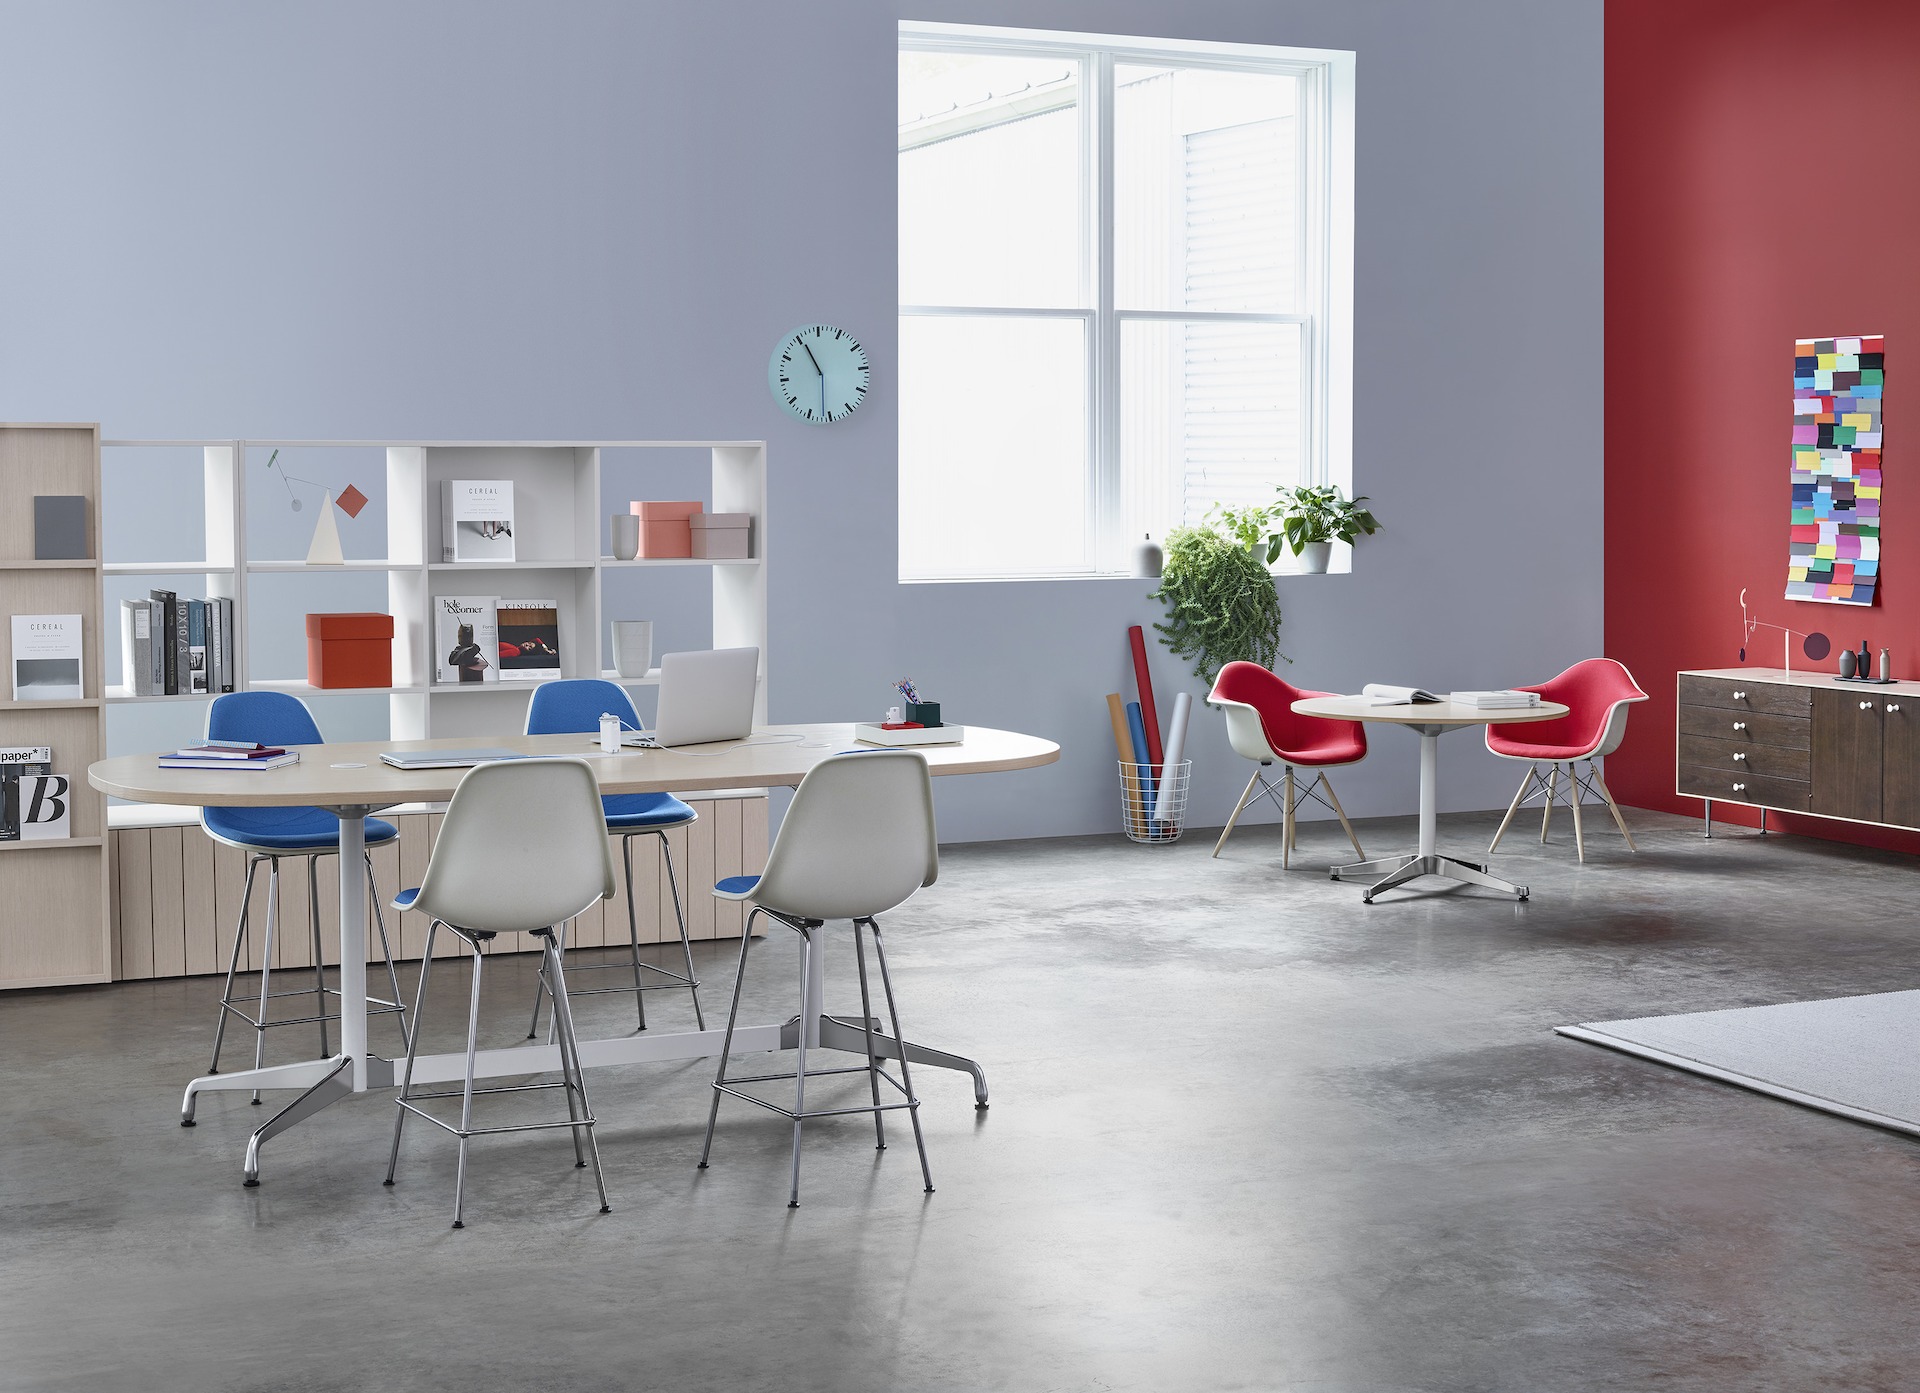 A Workshop setting is built around a group of four Eames Stools around a standing-height Eames Table, with a pair of upholstered Eames Molded Fiberglass armchairs at a small Eames Table below a nearby window.